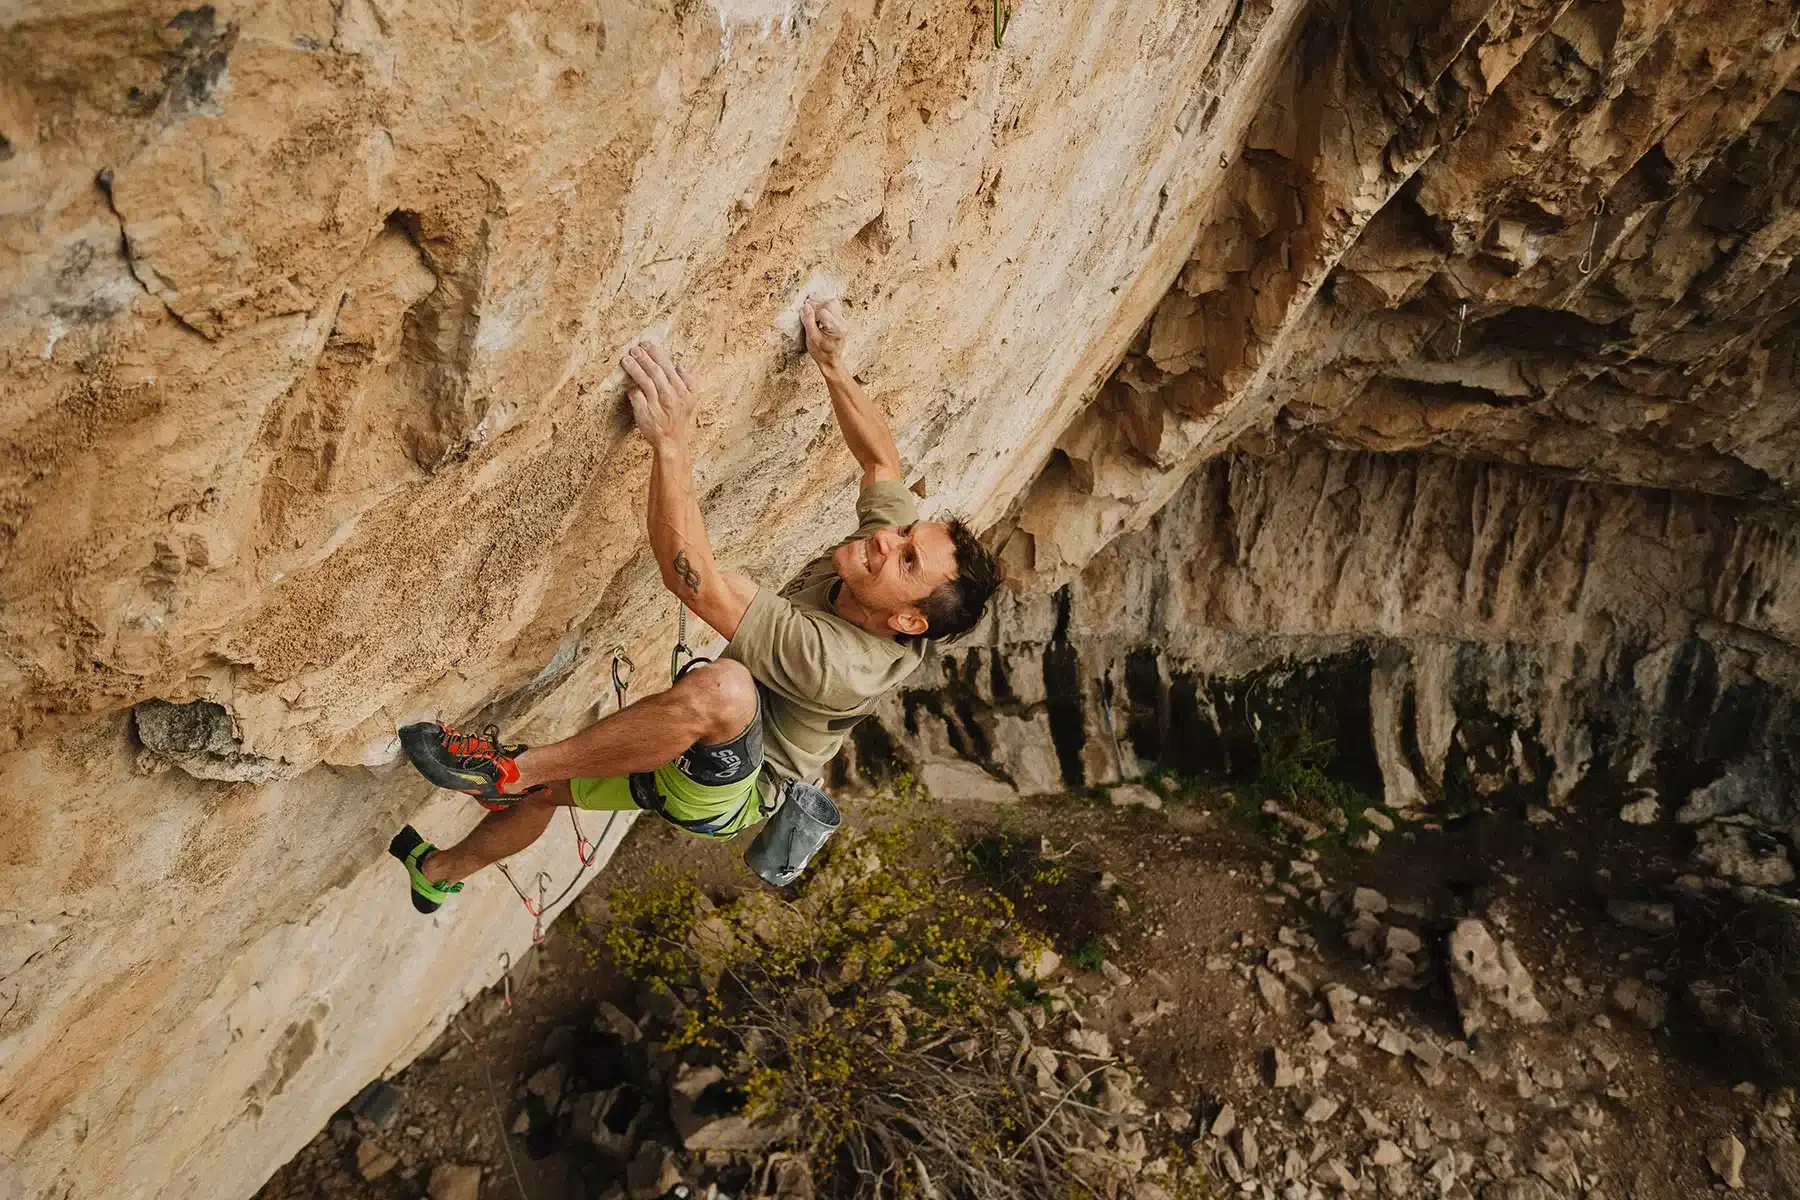 A rock climber in a beige shirt and green shorts is gripping a vertical rock wall. His face shows determination as he carefully navigates the rough, tan-colored rock. The ground below is scattered with rocks and sparse vegetation.